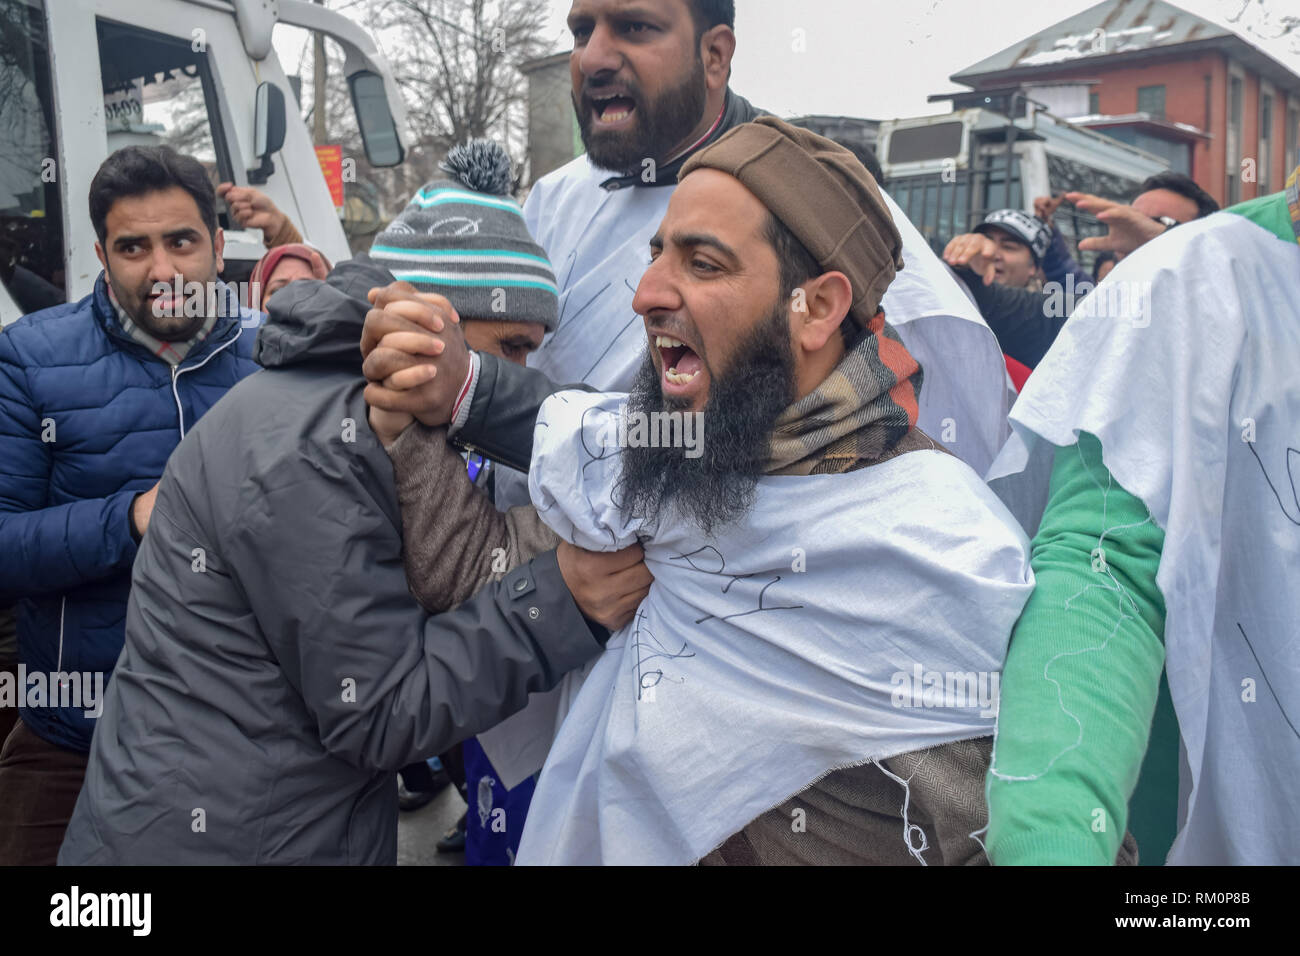 A member of Jammu and Kashmir police in civvies seen detaining a member of NHM employees during the Protest in Srinagar. NHM (National Health Mission) employees on took out an anti-government protest march towards the Raj Bhavan in Srinagar. The employees who have been on a strike since the past thirty days are demanding regularization in a phased manner, equal pay for equal work and other social security benefits. Police used batons on the Protesters and many of them were detained during the protest. Stock Photo